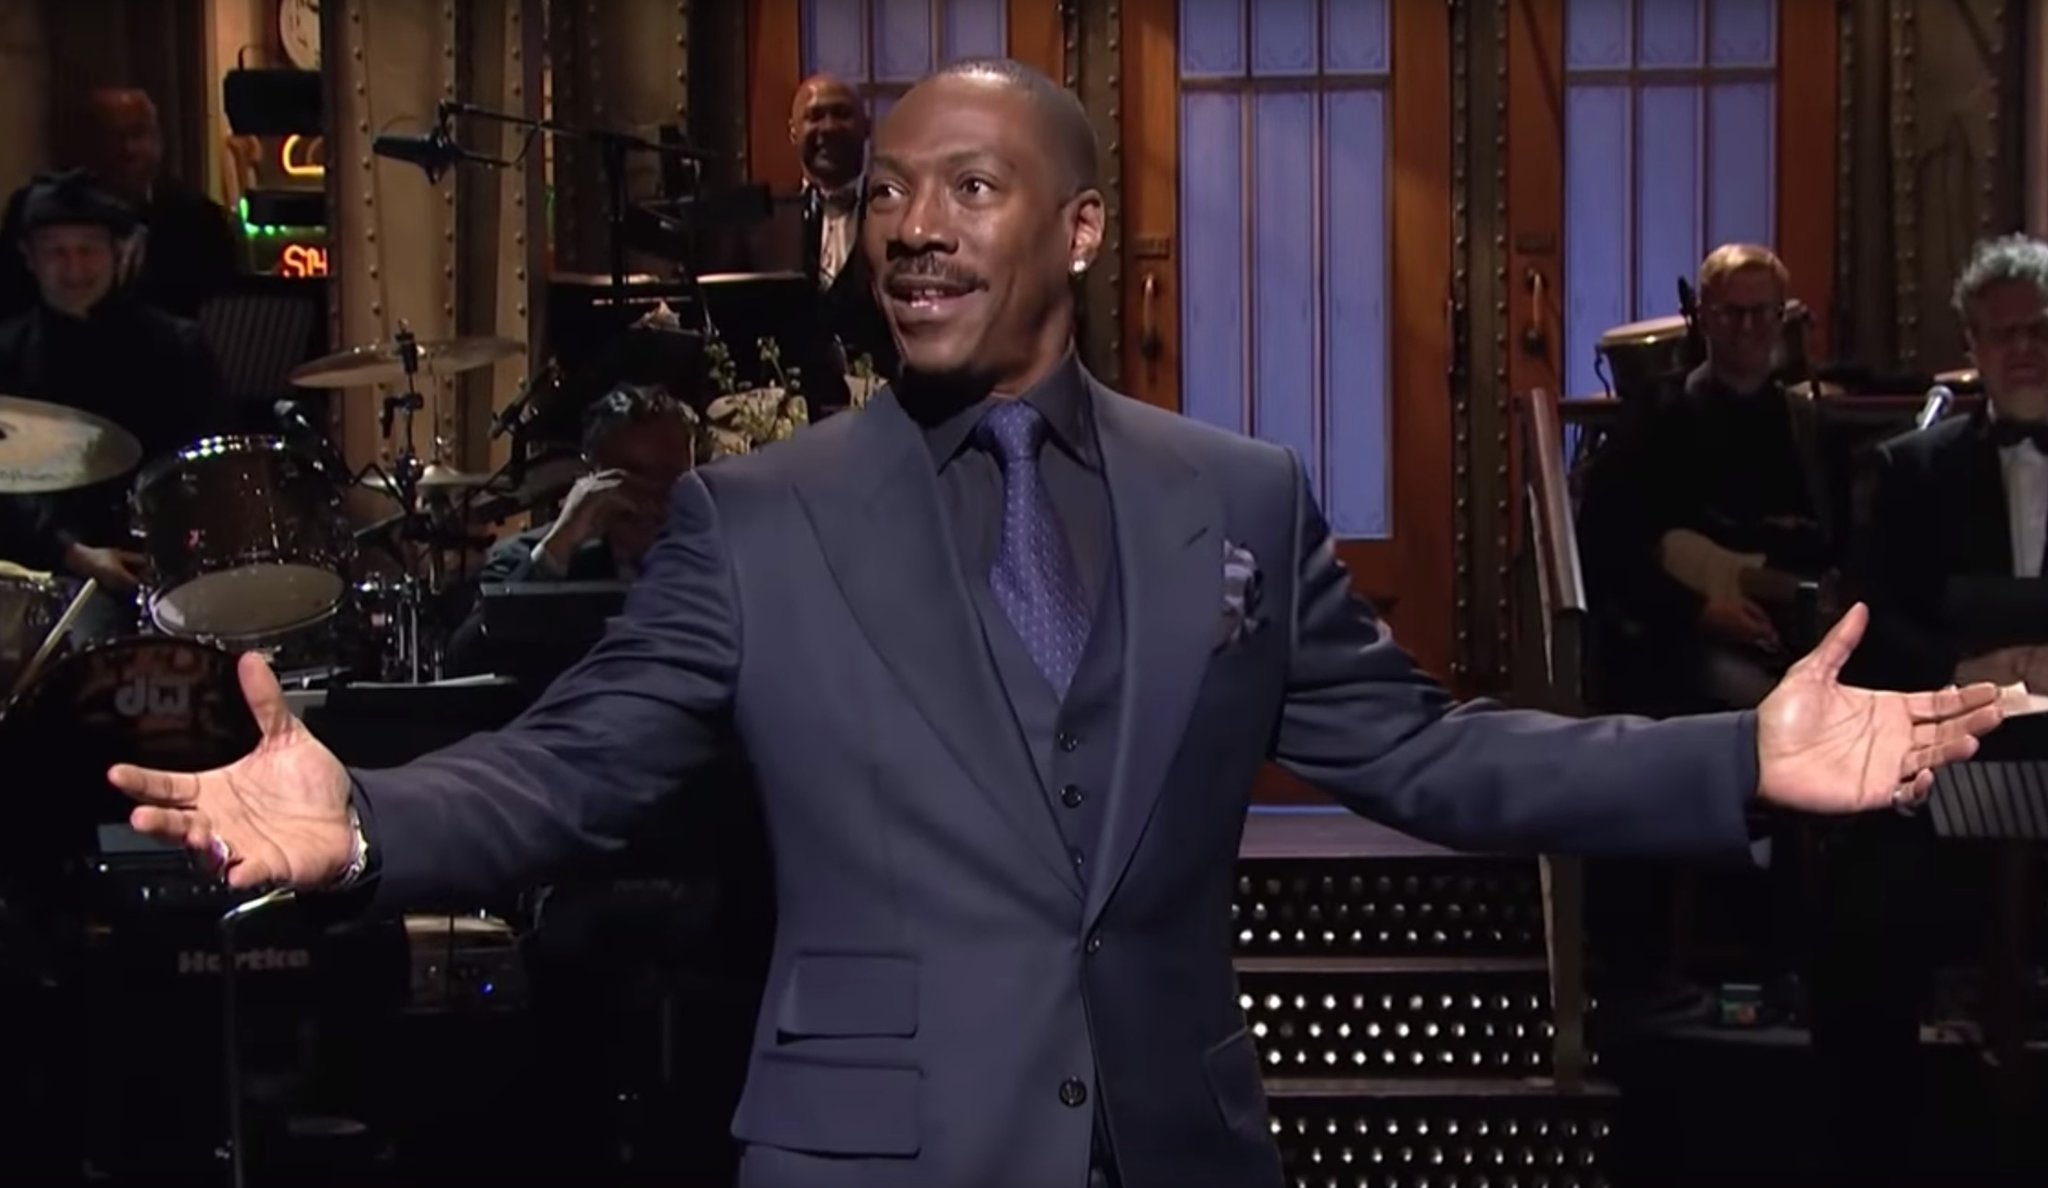 Eddie Murphy’s Hilarious Return To SNL Delivers High Ratings For NBC